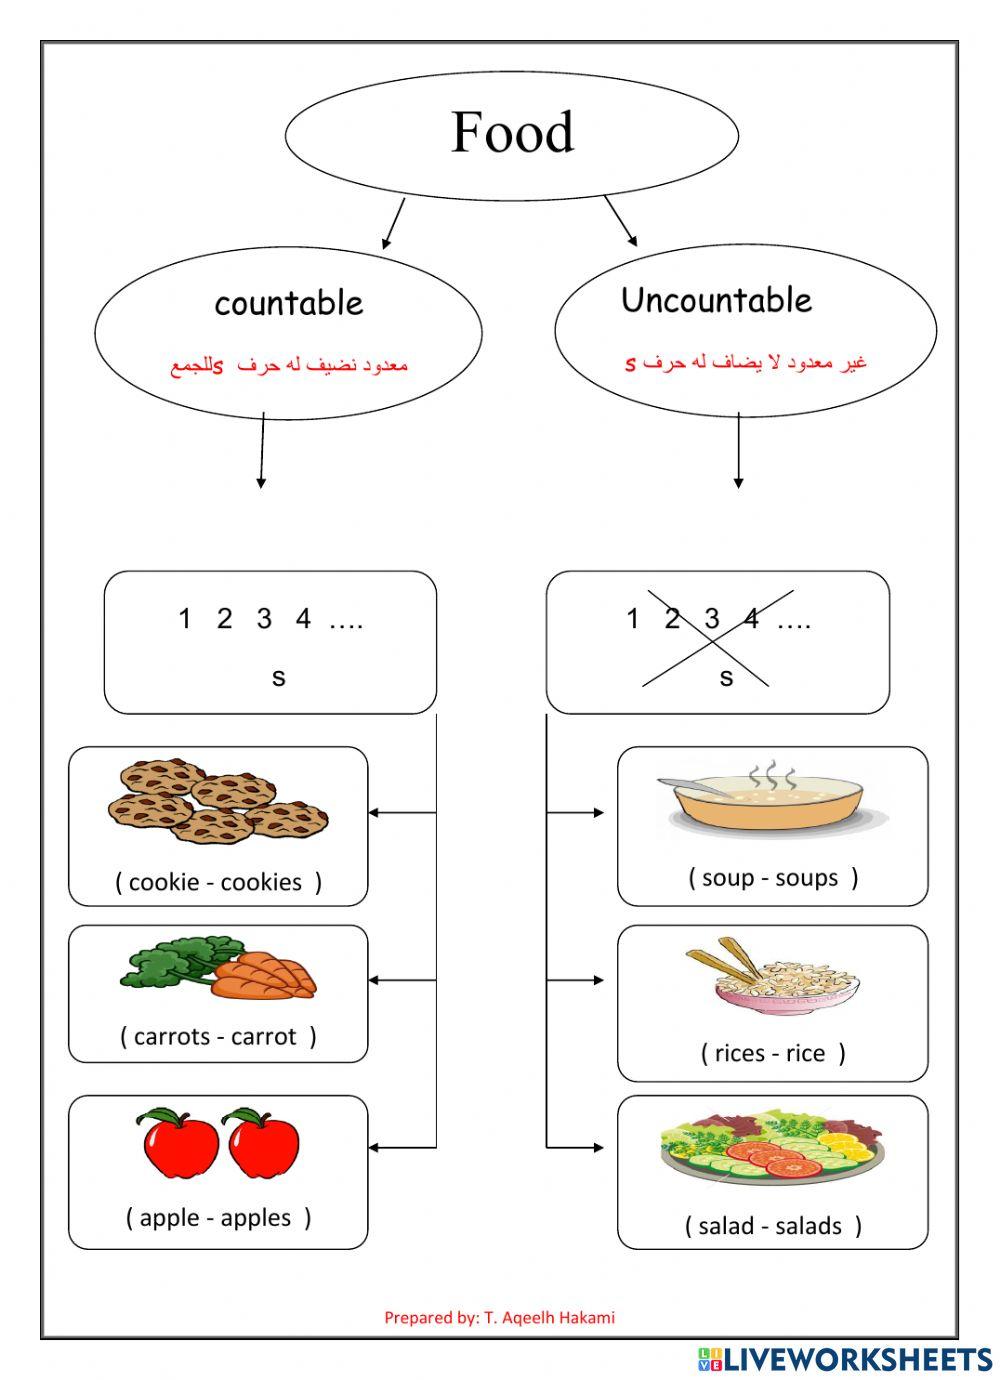 We can2 General Summary on FOOD